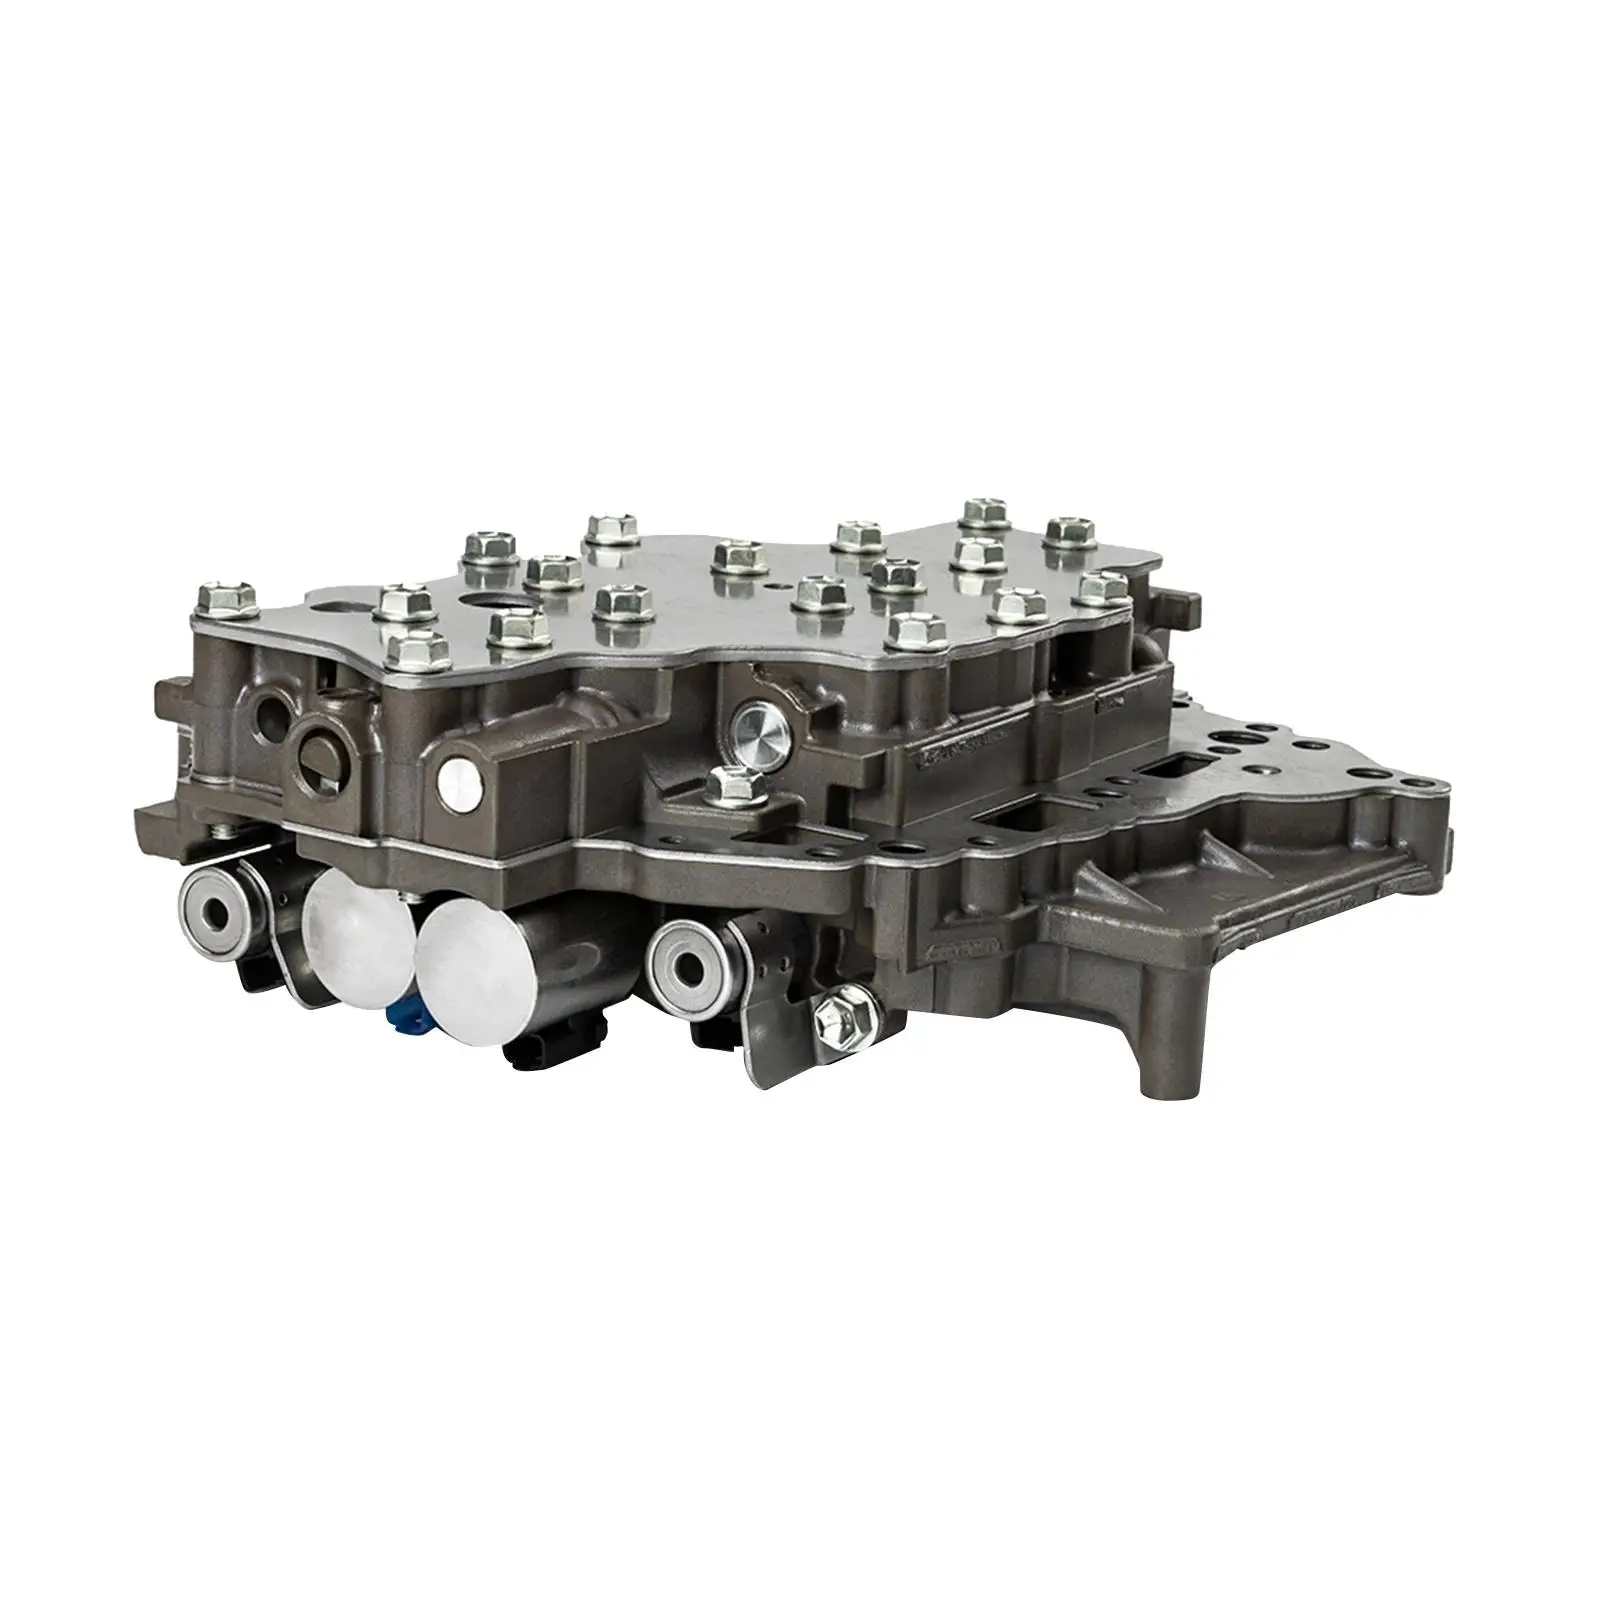 Automatic Transmission Gearbox Valve Body K310 for  Corolla1.6L 1.8L Ractis15 to - £396.94 GBP